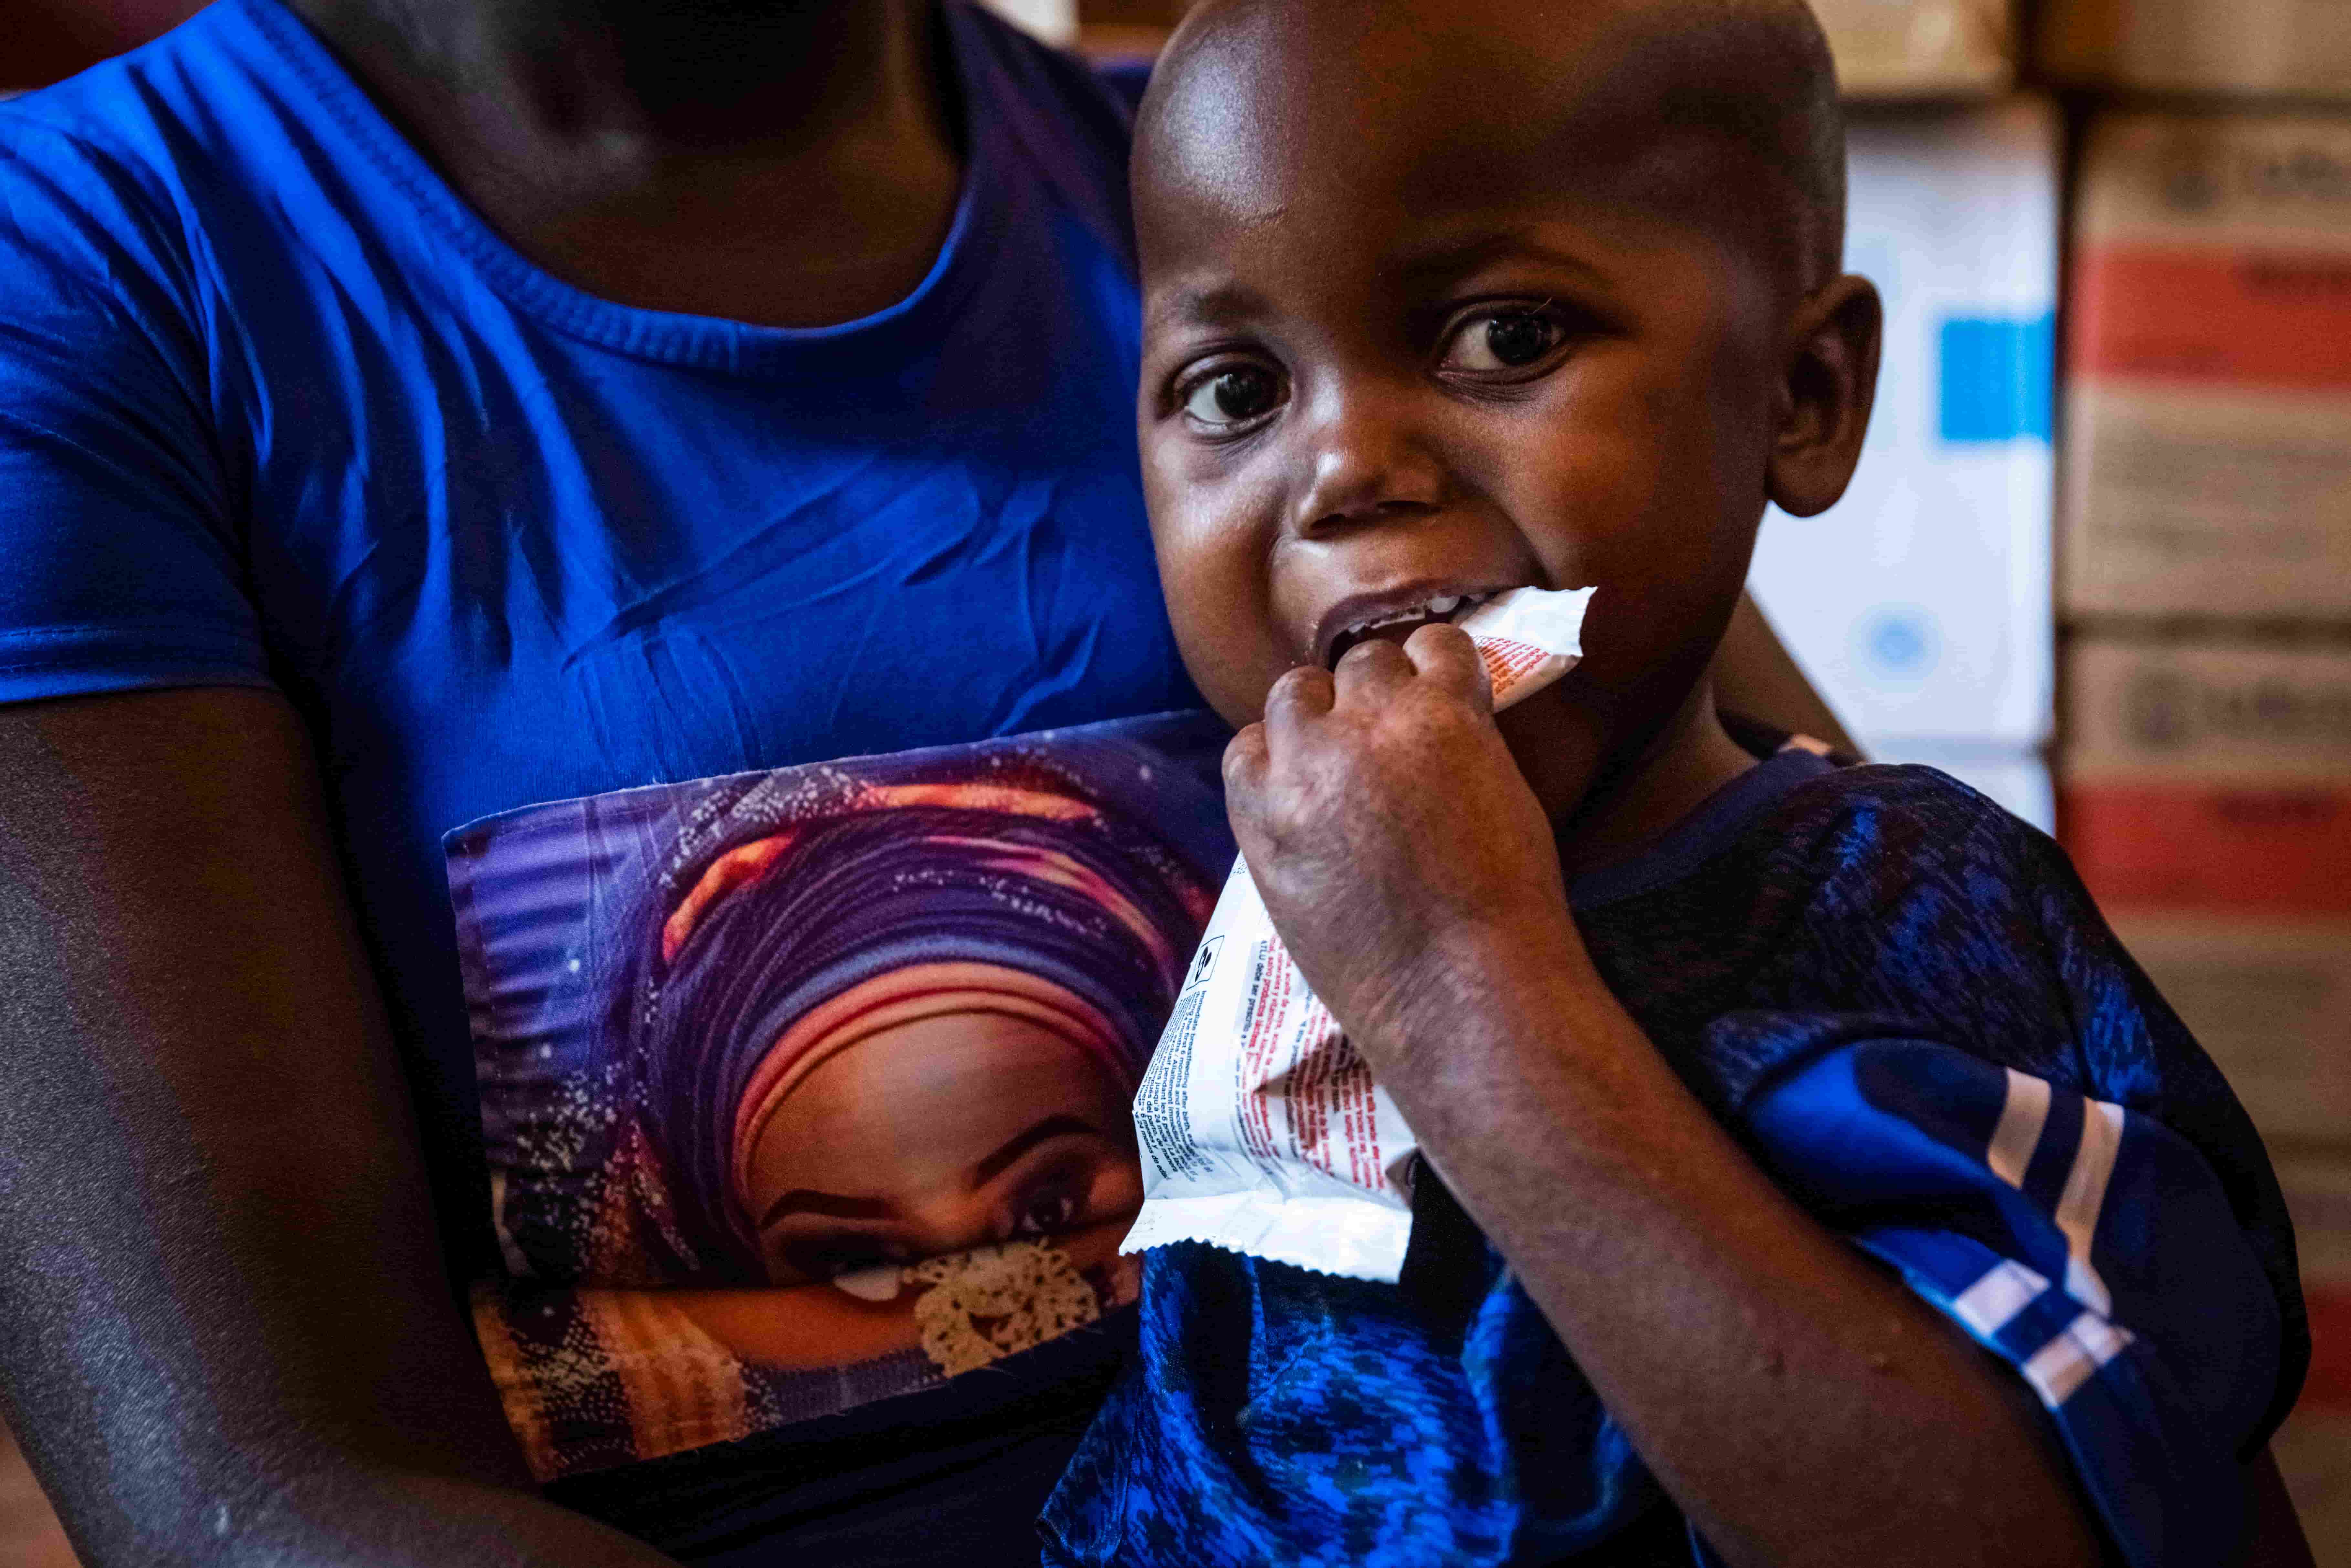 Infant eating therapeutic food to treat malnutrition.